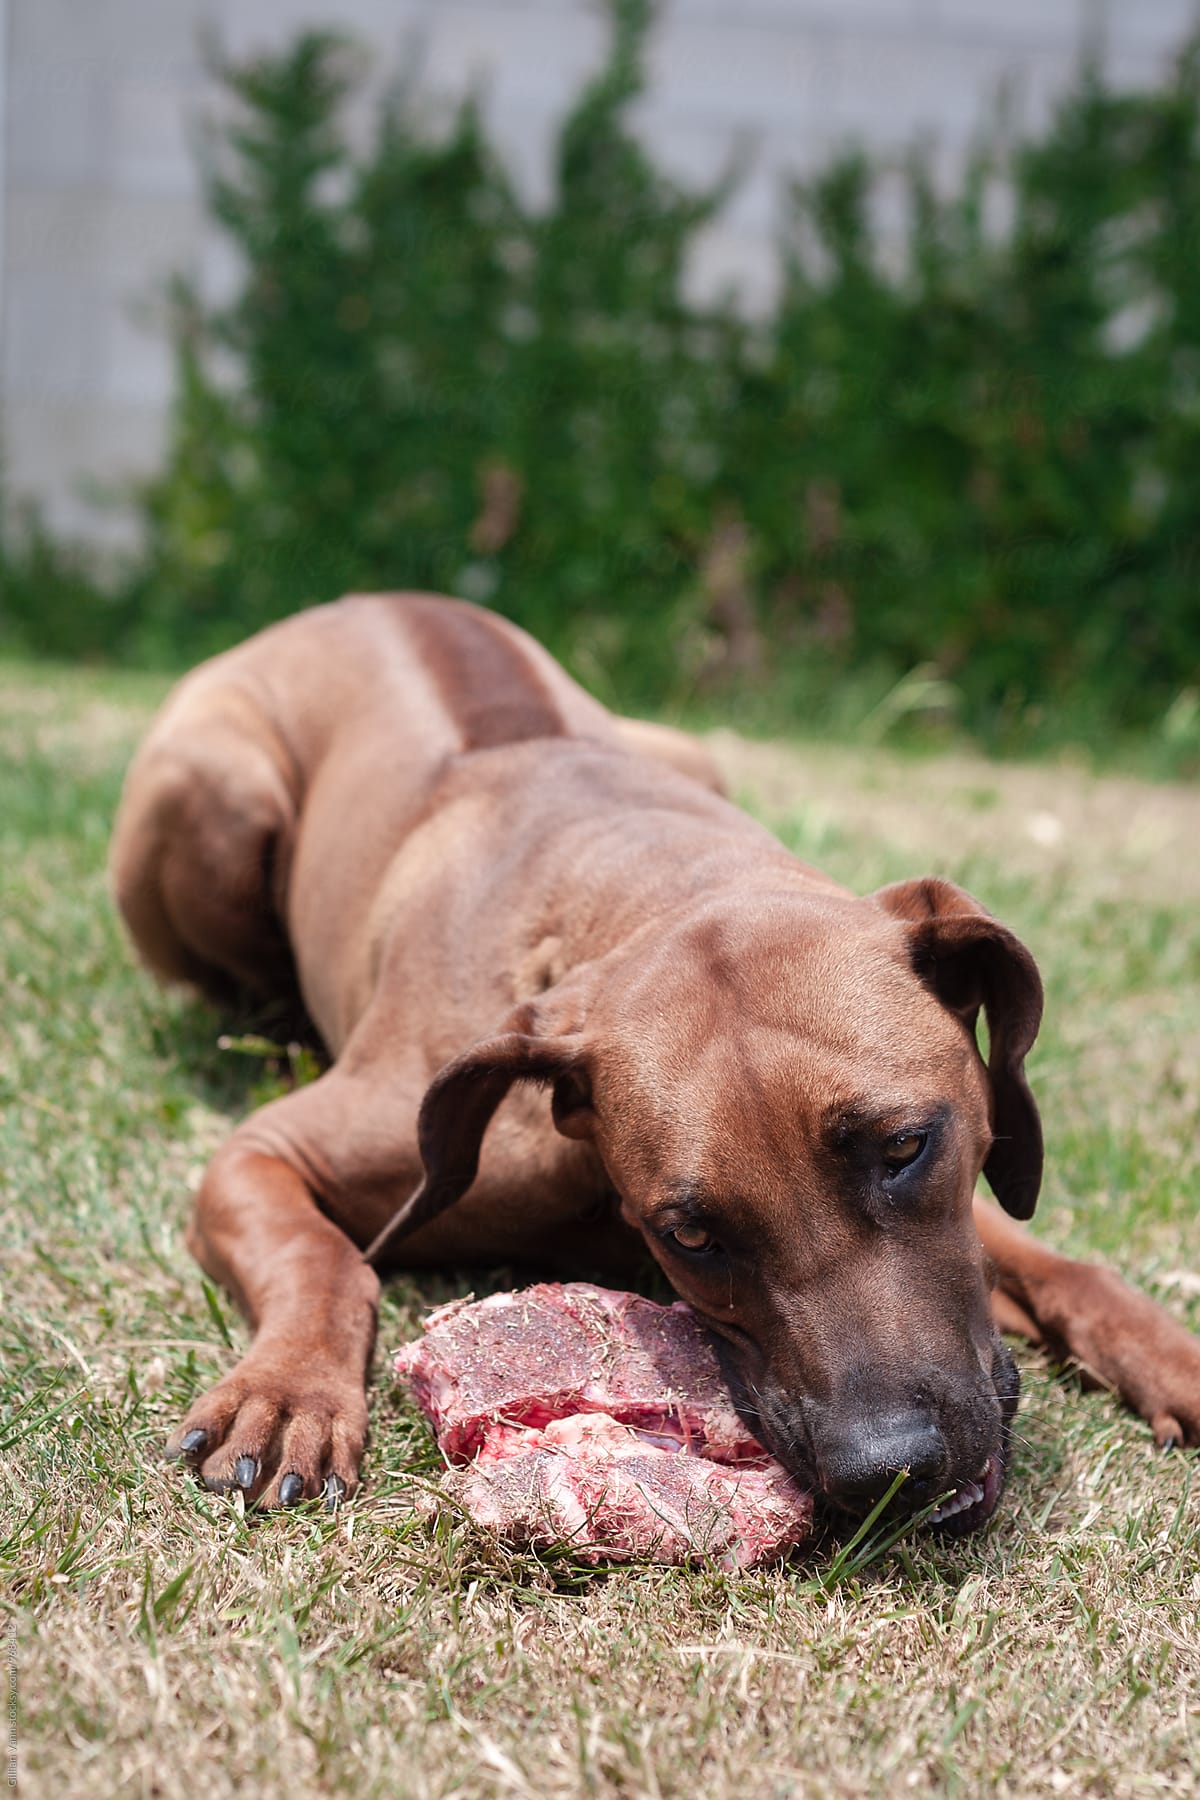 dog eating raw meat and bone outdoors on the grass